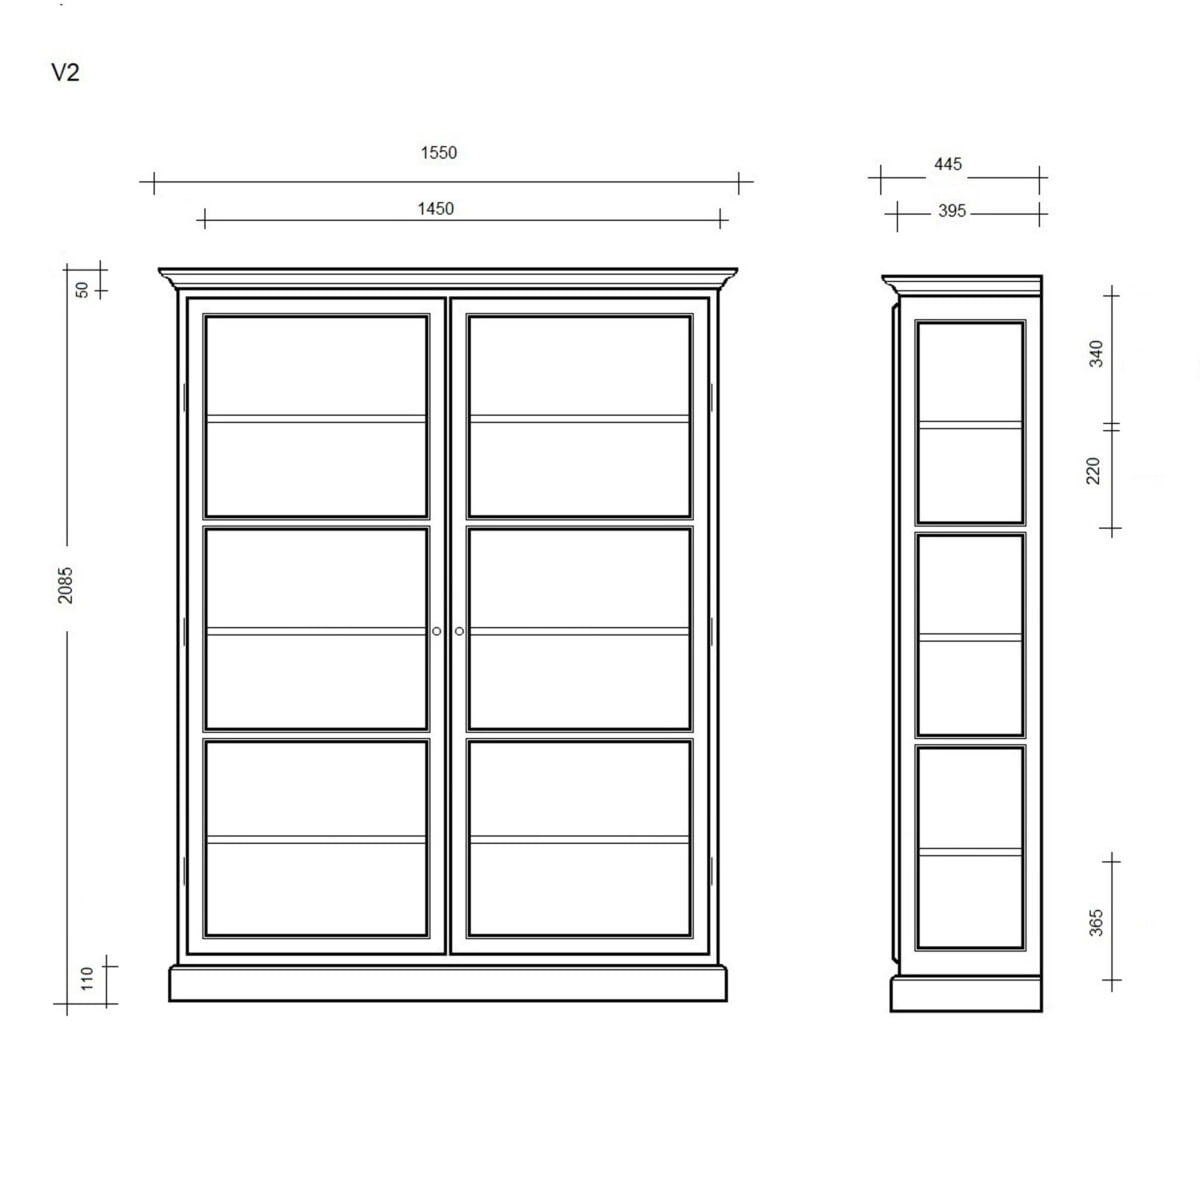 Lindebjerg Design drawing V2 Classic